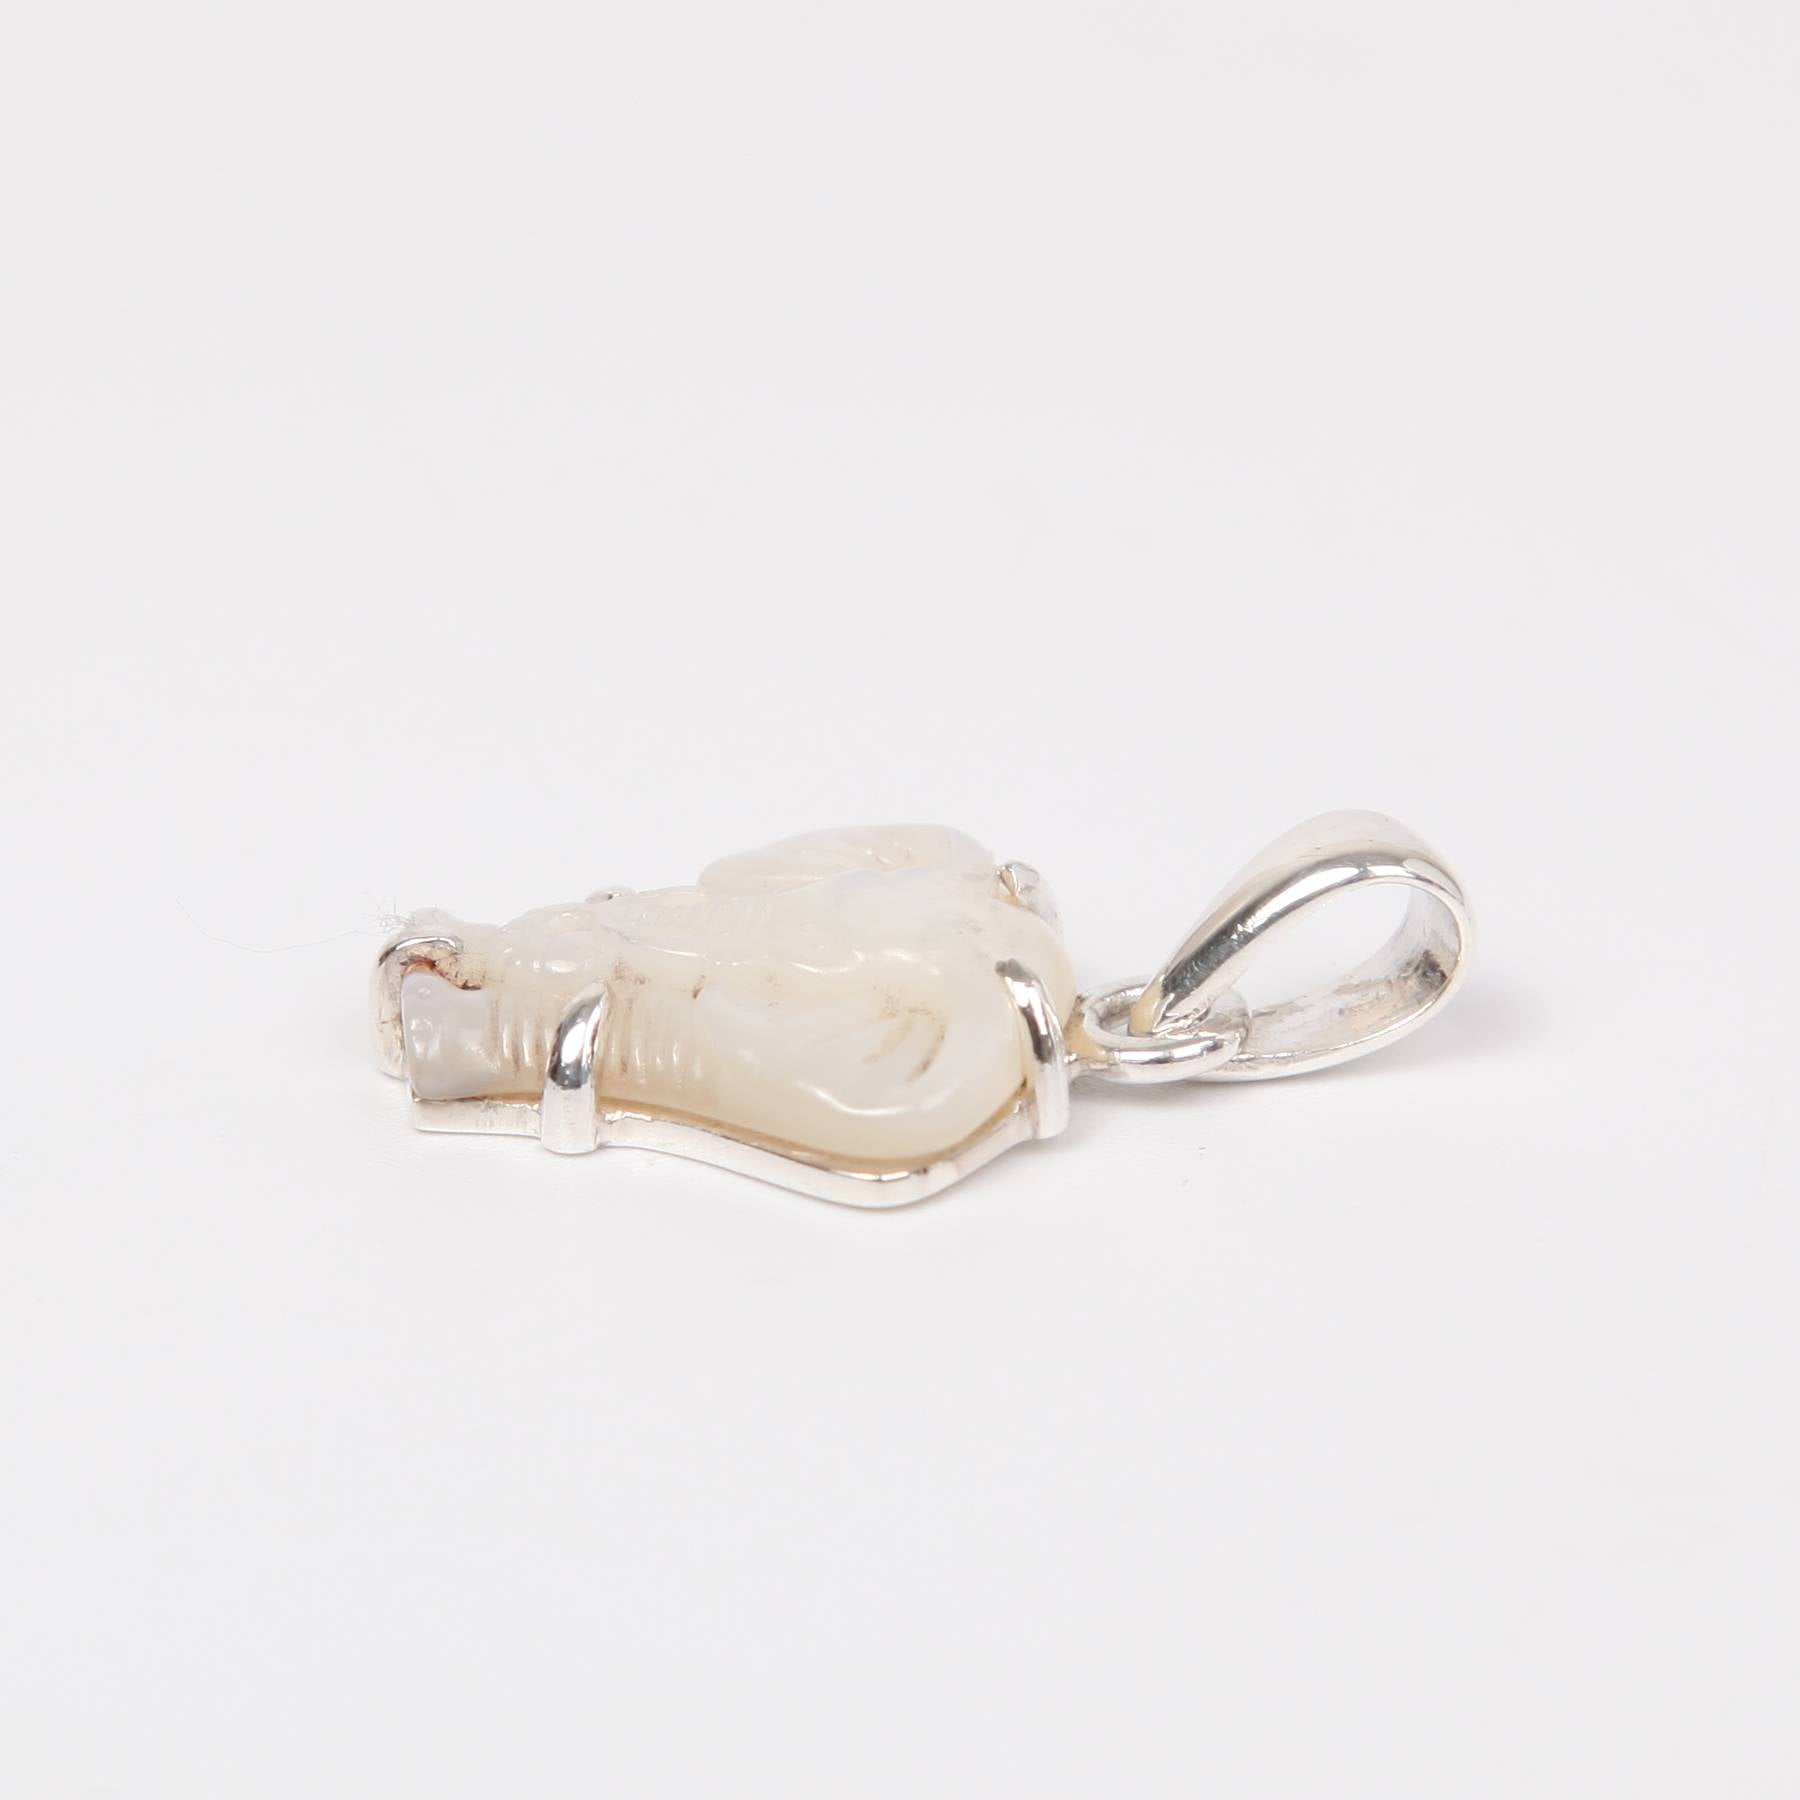 Mother of Pearl Elephant Pendant with Sterling Silver